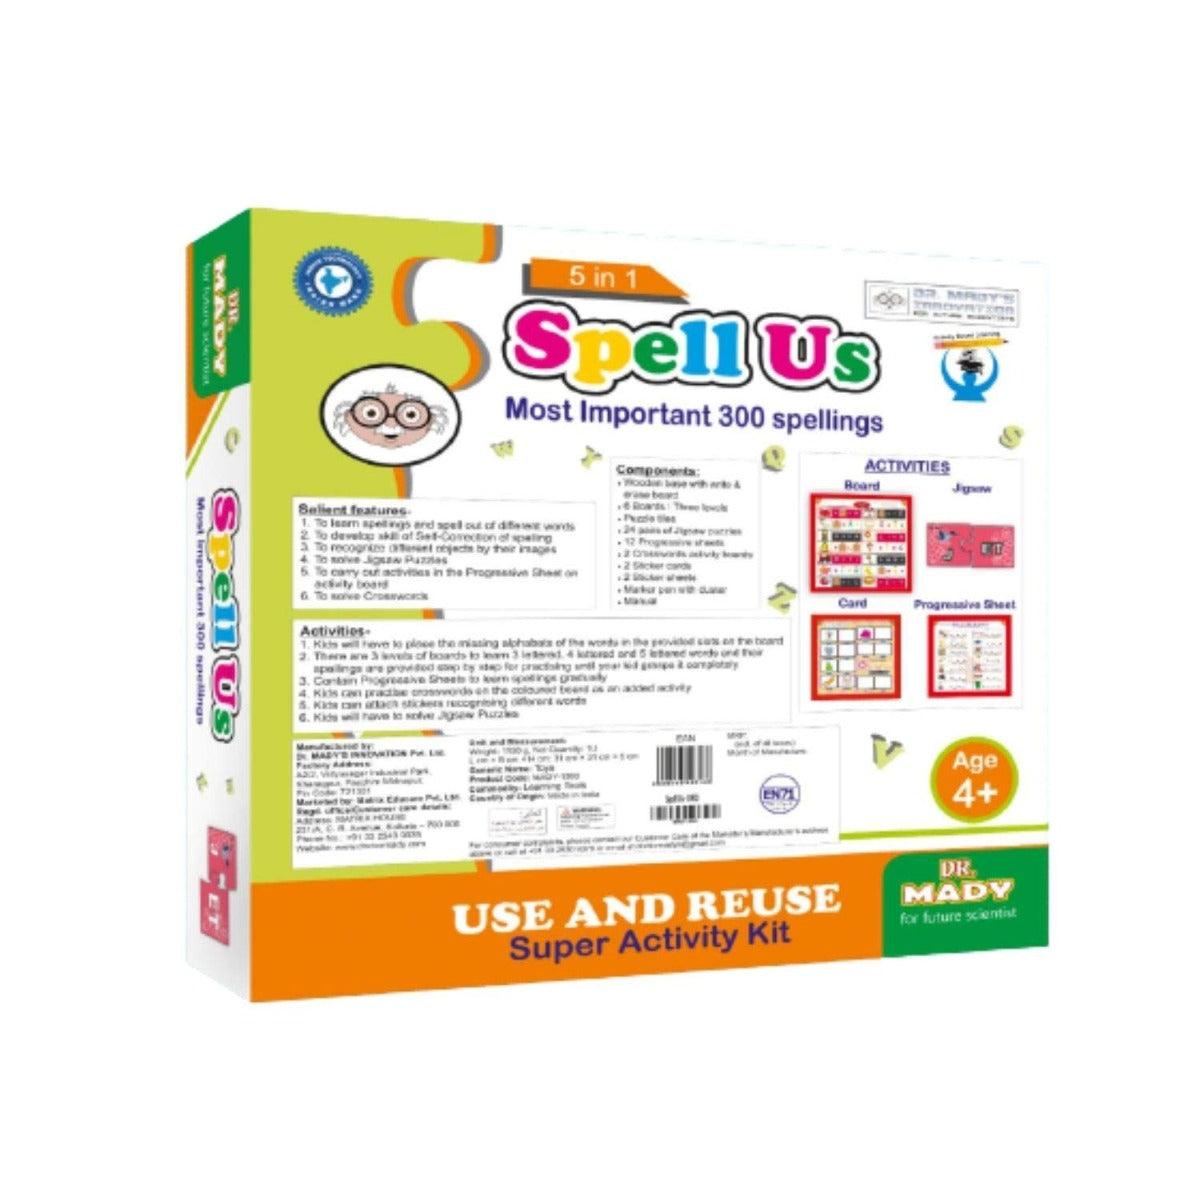 Dr. Mady Spell Us, 5 In 1 Super Activity Kit